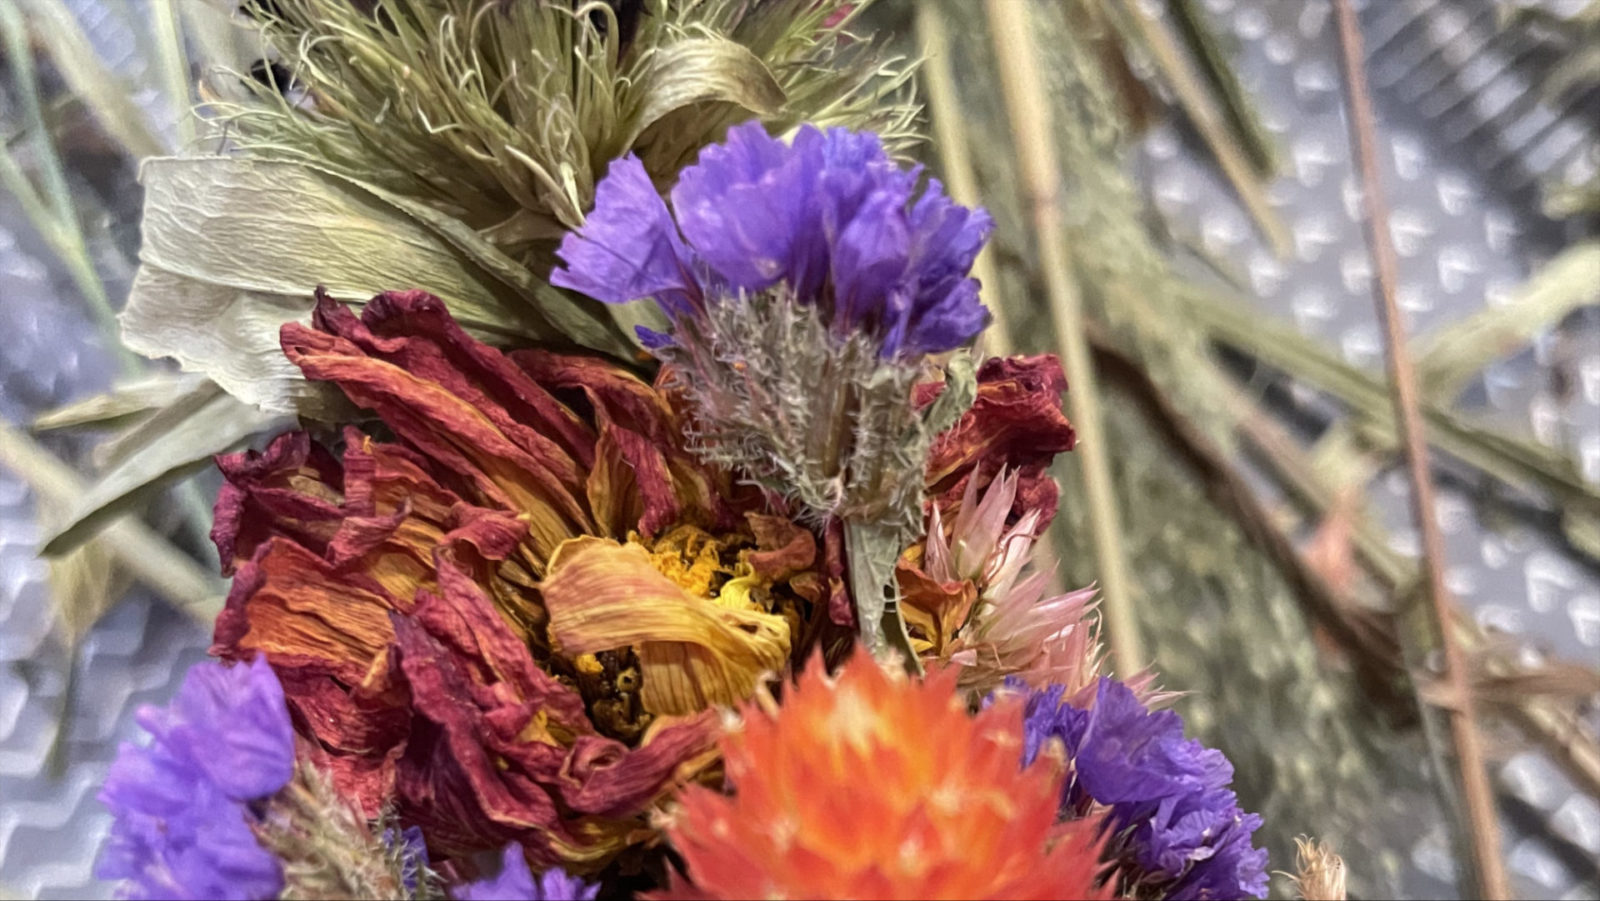 Dried flowers show vivid color in a workshop on making flower crowns with Full Well Farm at the Plant Connector in North Adams.